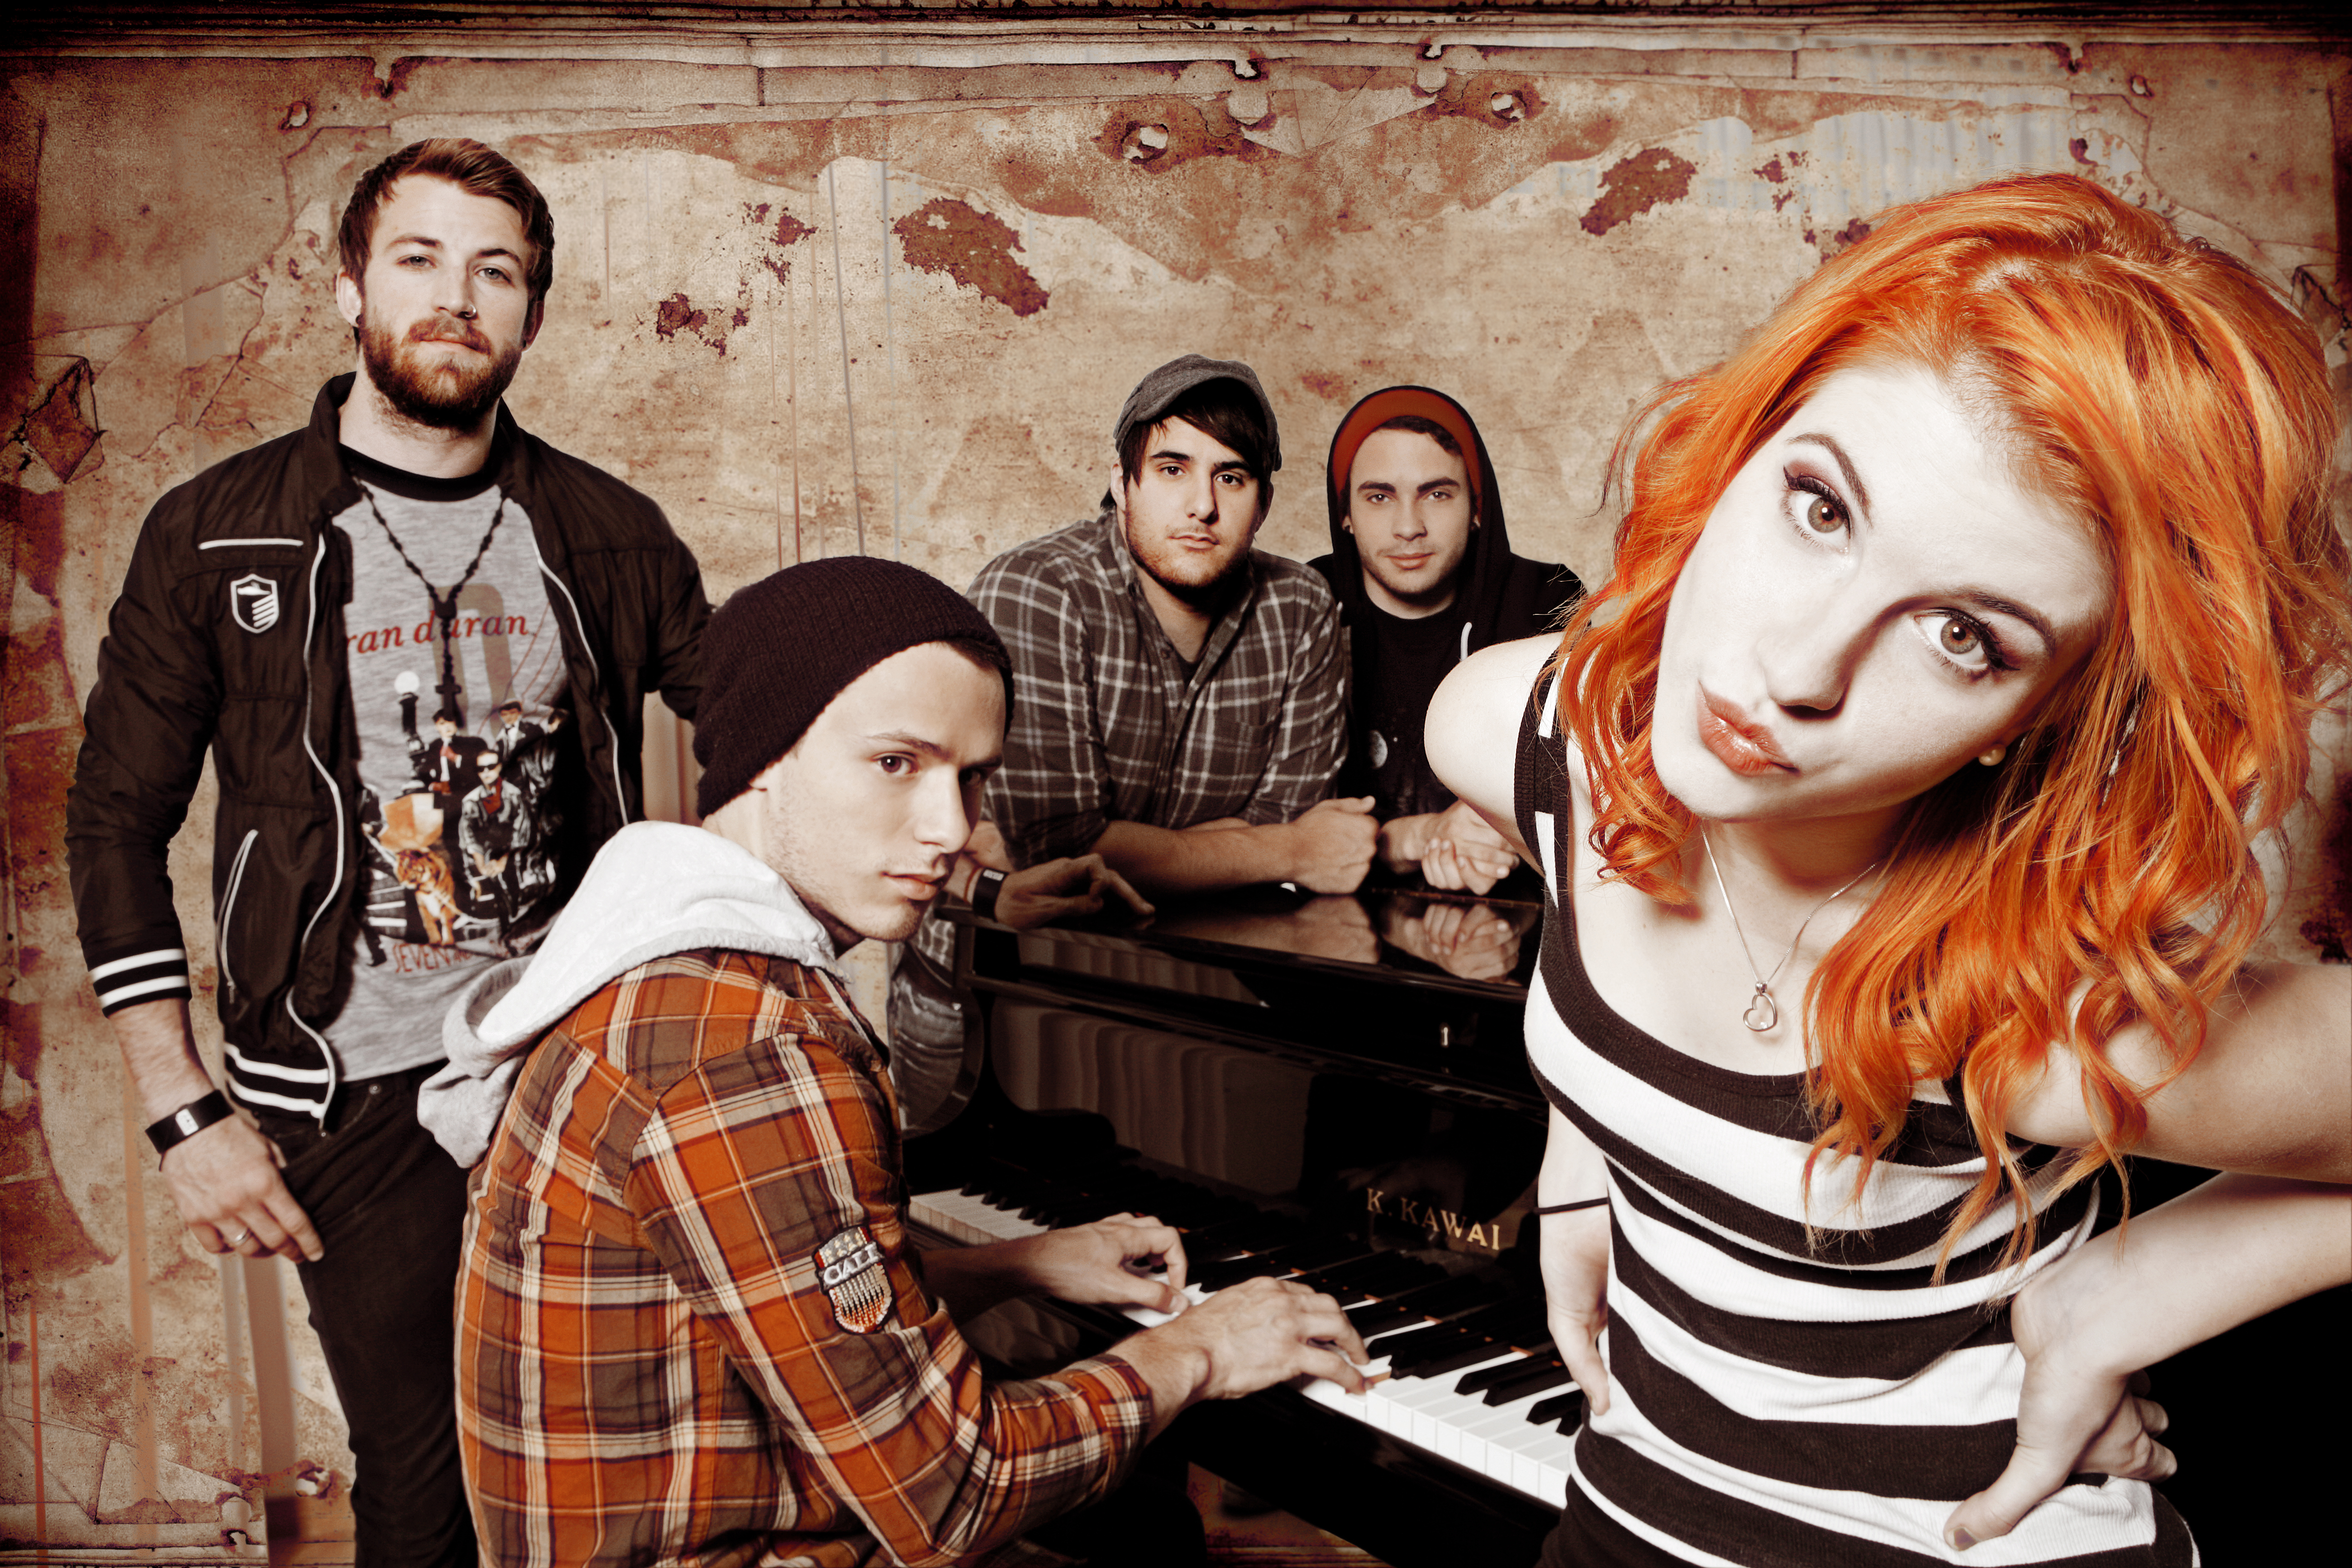 Paramore is in the UK in the days preceding Download Festival